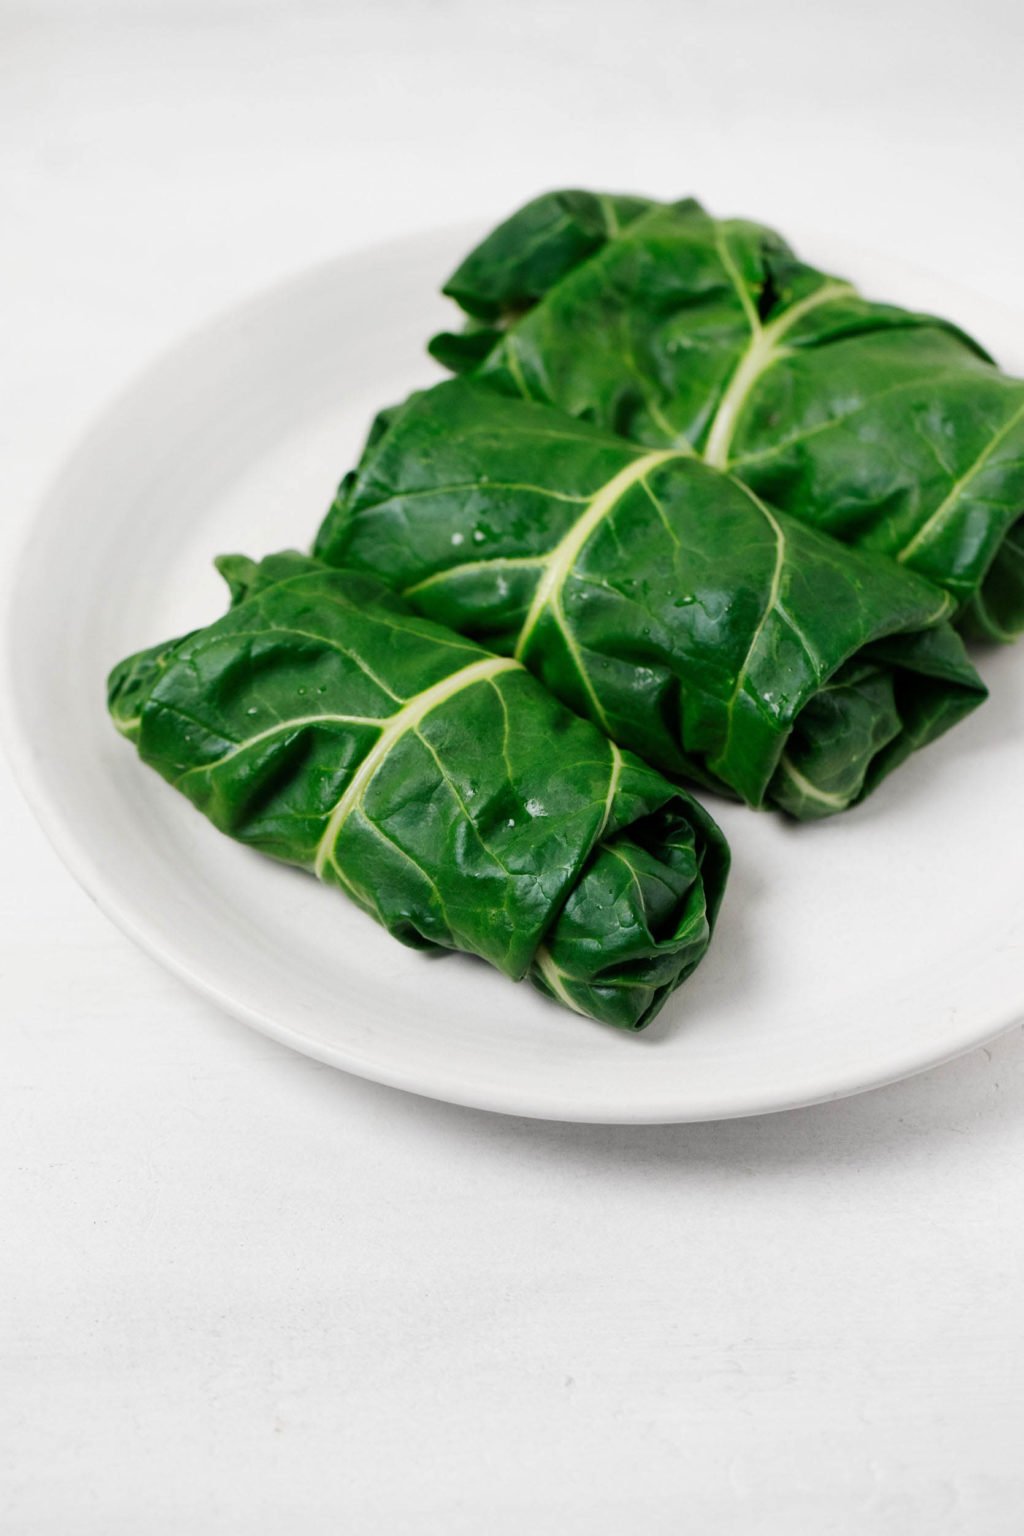 Three large, leafy greens have been steamed, stuffed, and turned into wraps. They rest on a white serving platter.